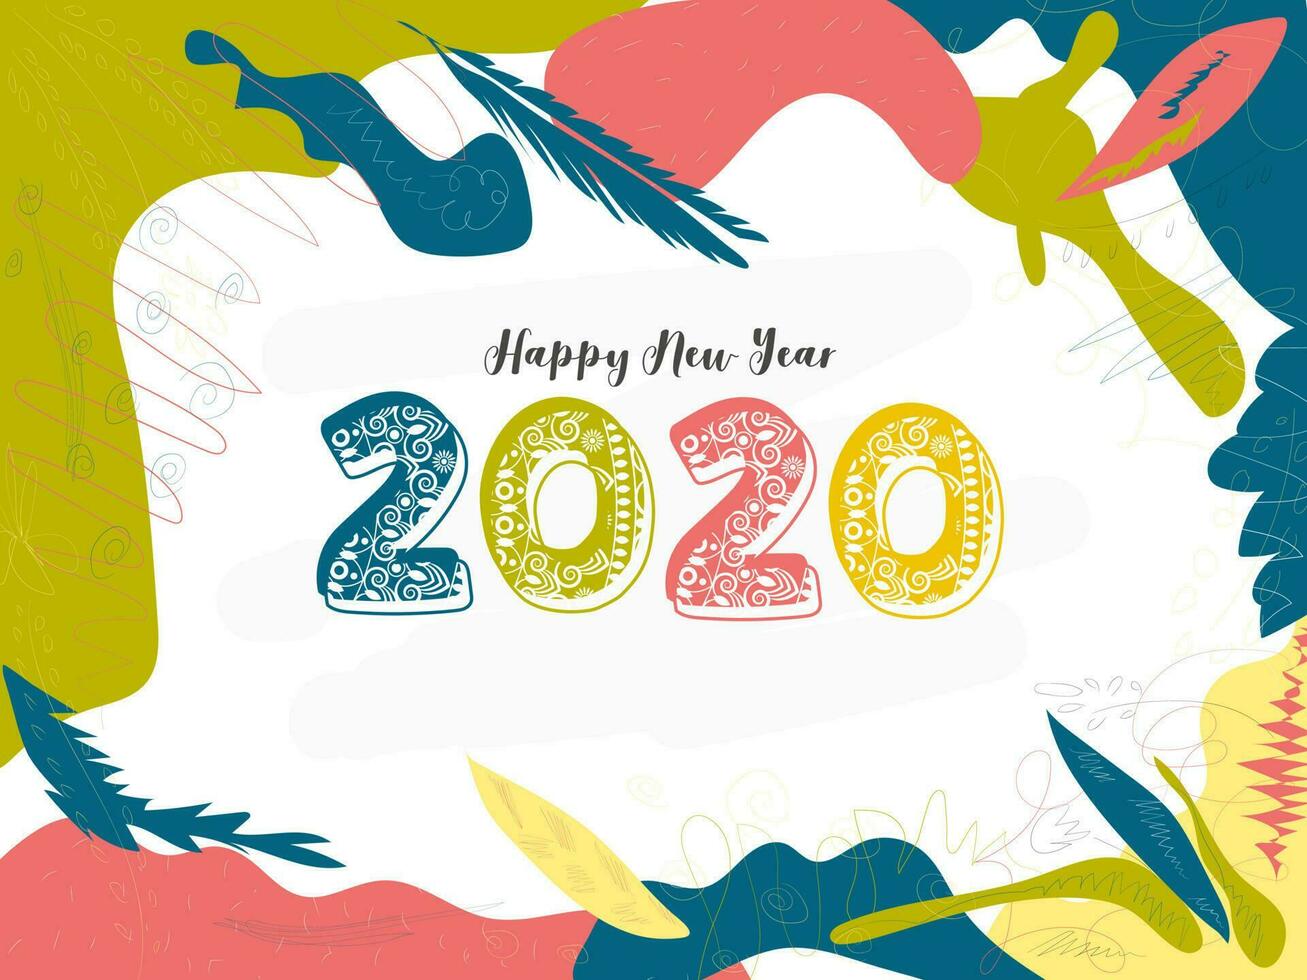 Flat style greeting card design with 2020 text made by floral pattern on abstract colorful leaves background for Happy New Year celebration. vector